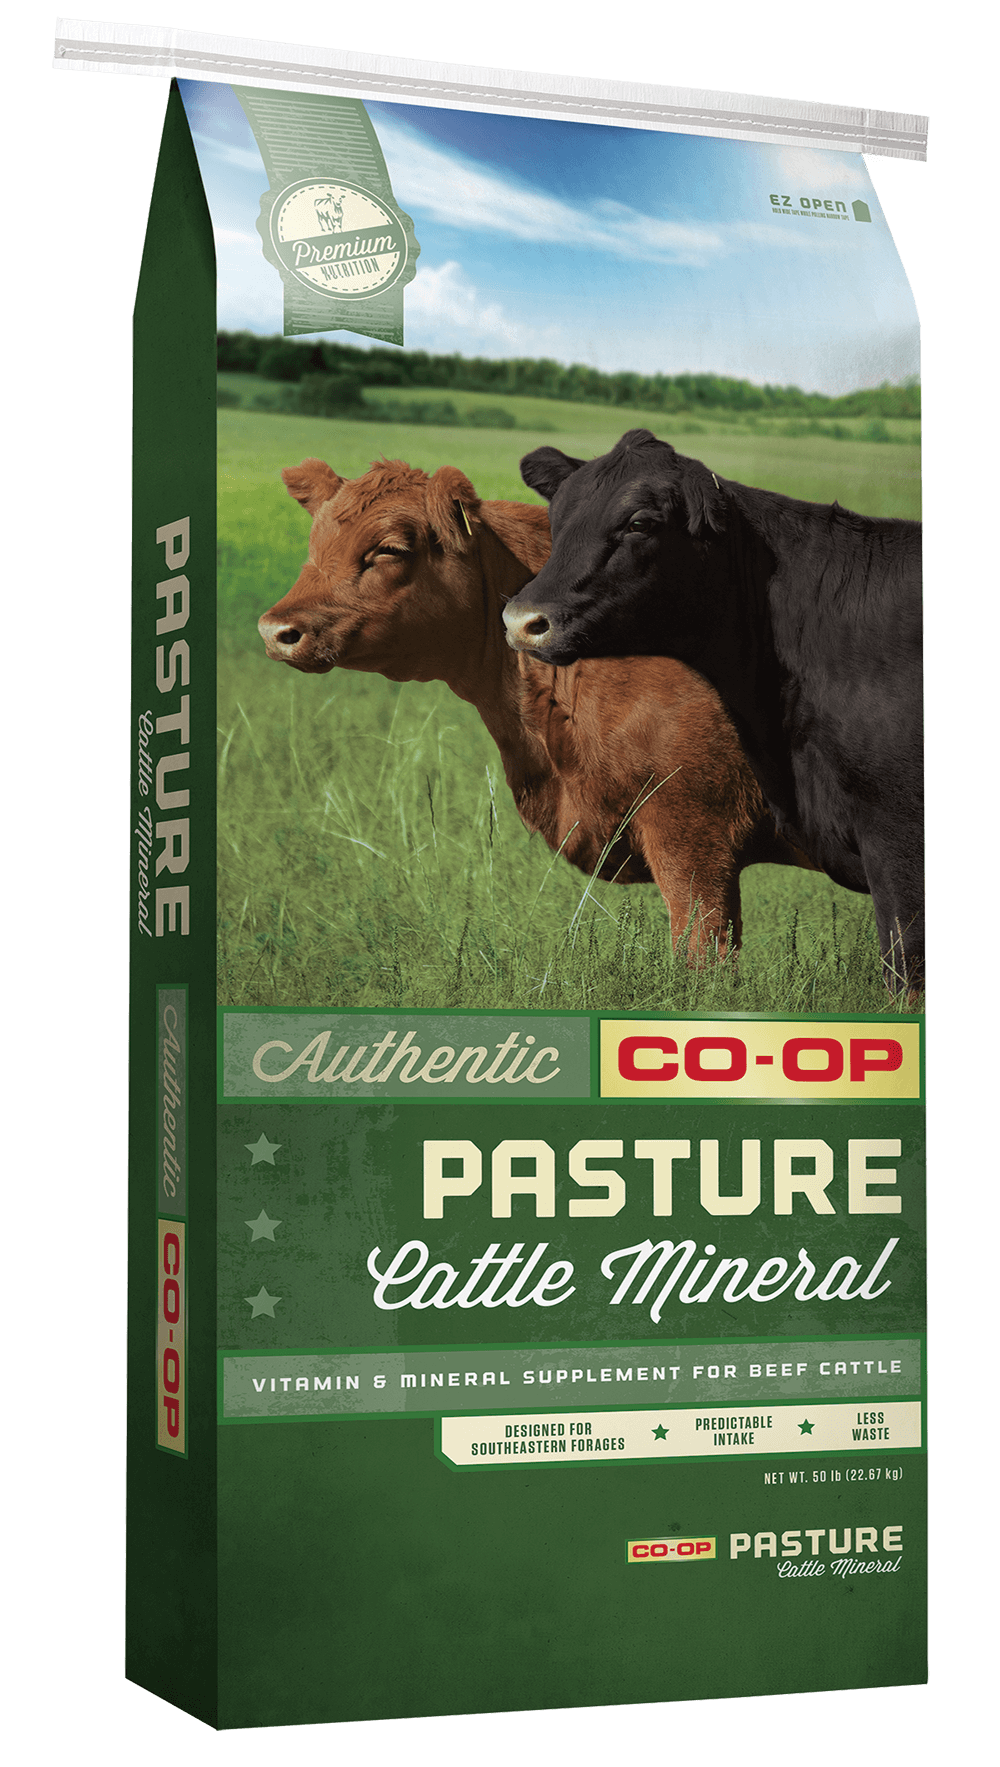 TFC-cattle-mineral-pasture